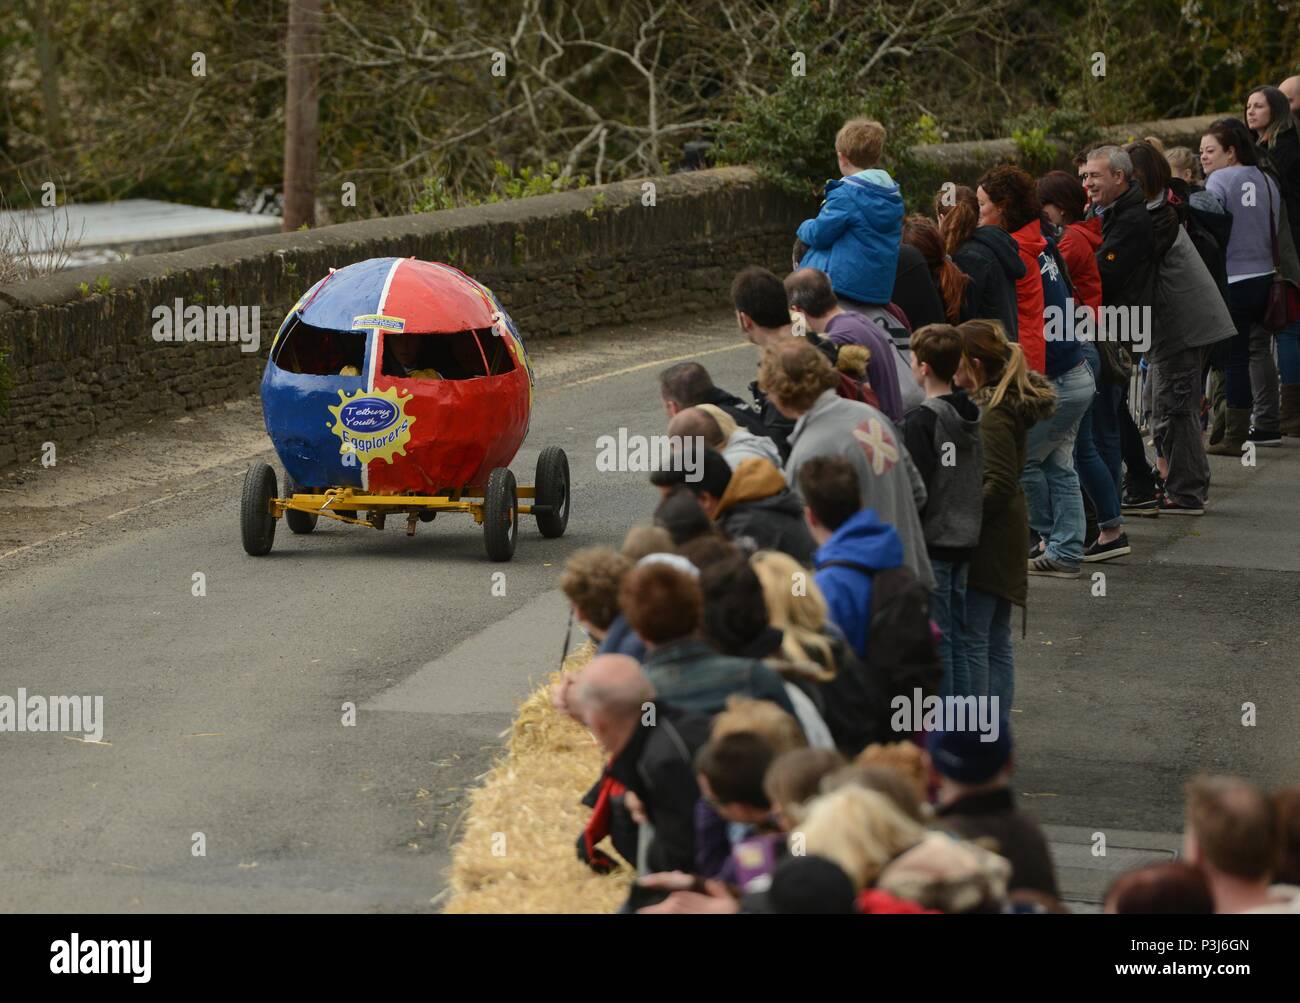 Wacky Races take place in Tetbury, run by the Lions Club 02/05/2016 Stock Photo